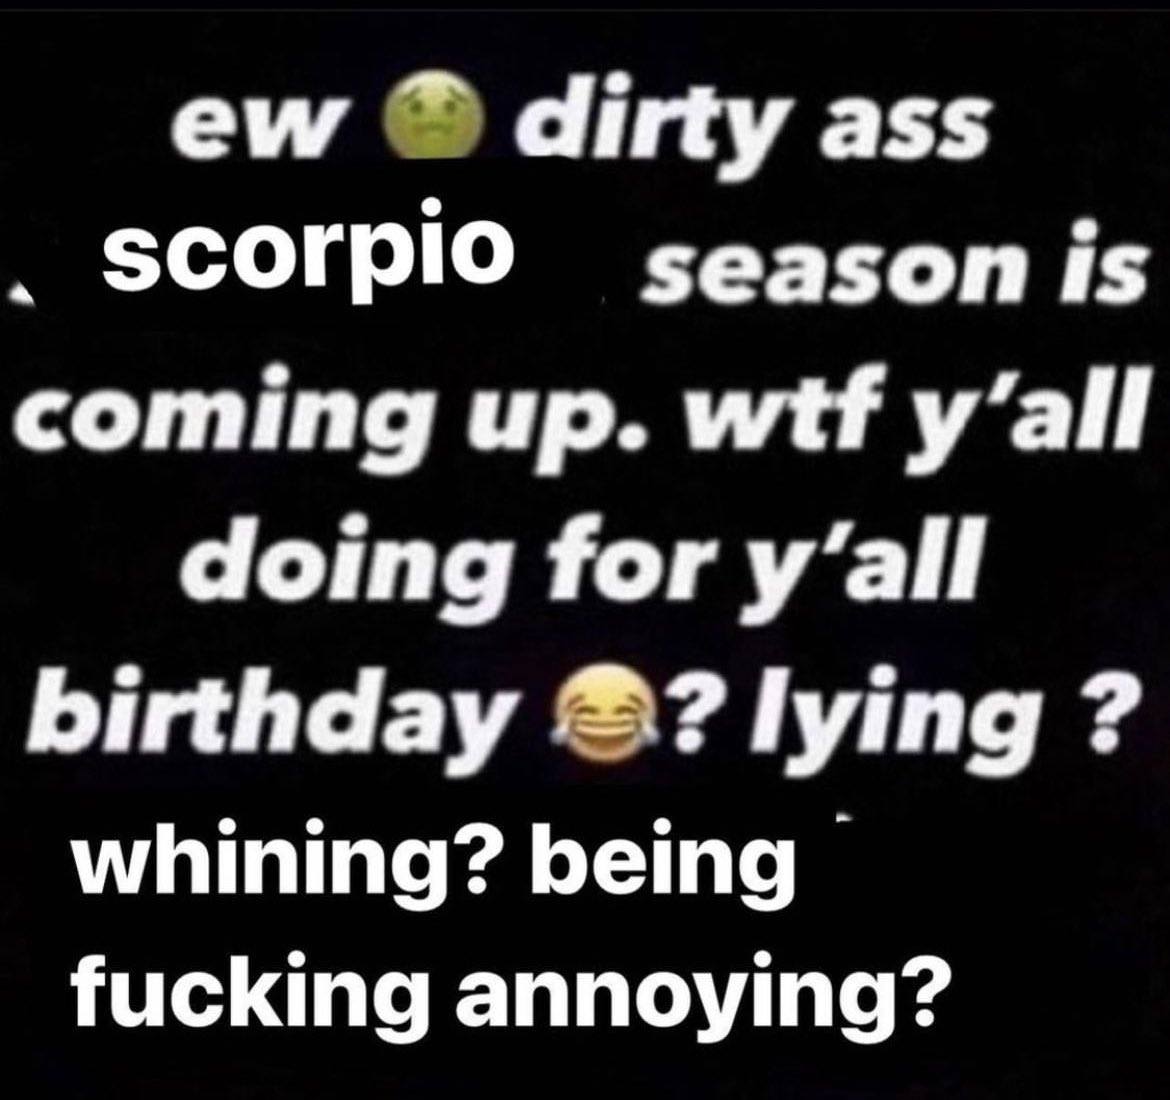 yes its my bday today (yes i am a scorpio) - Imgflip